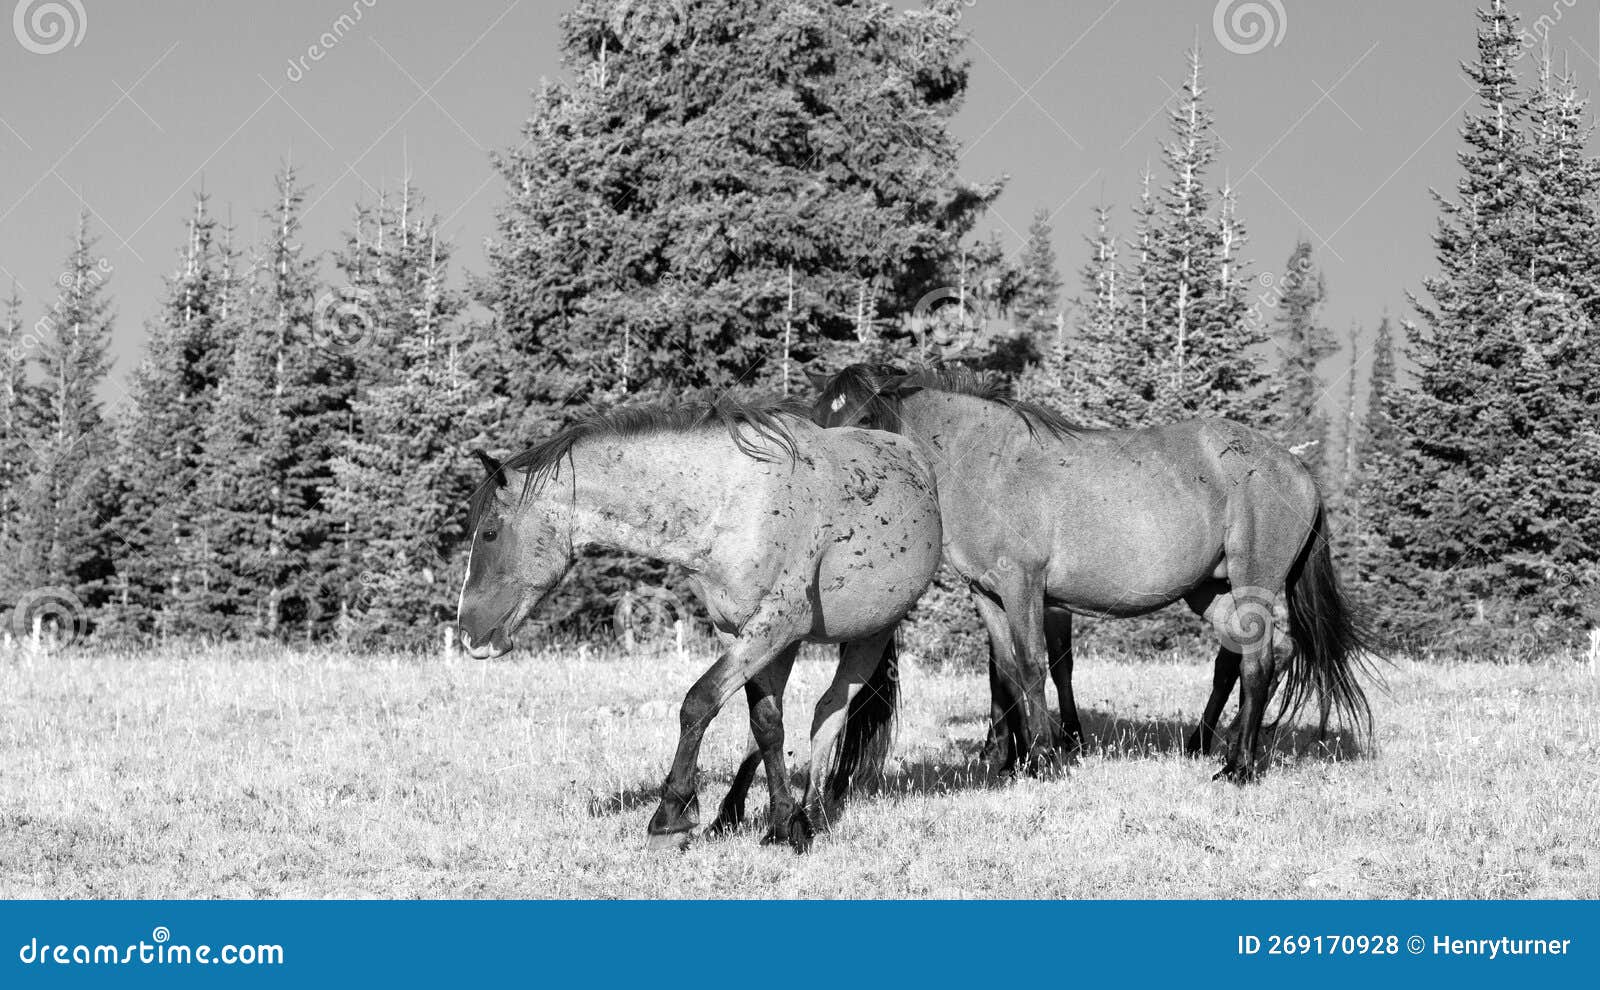 wild horse band stallions vying for position on pryor mountain in montana usa - black and white